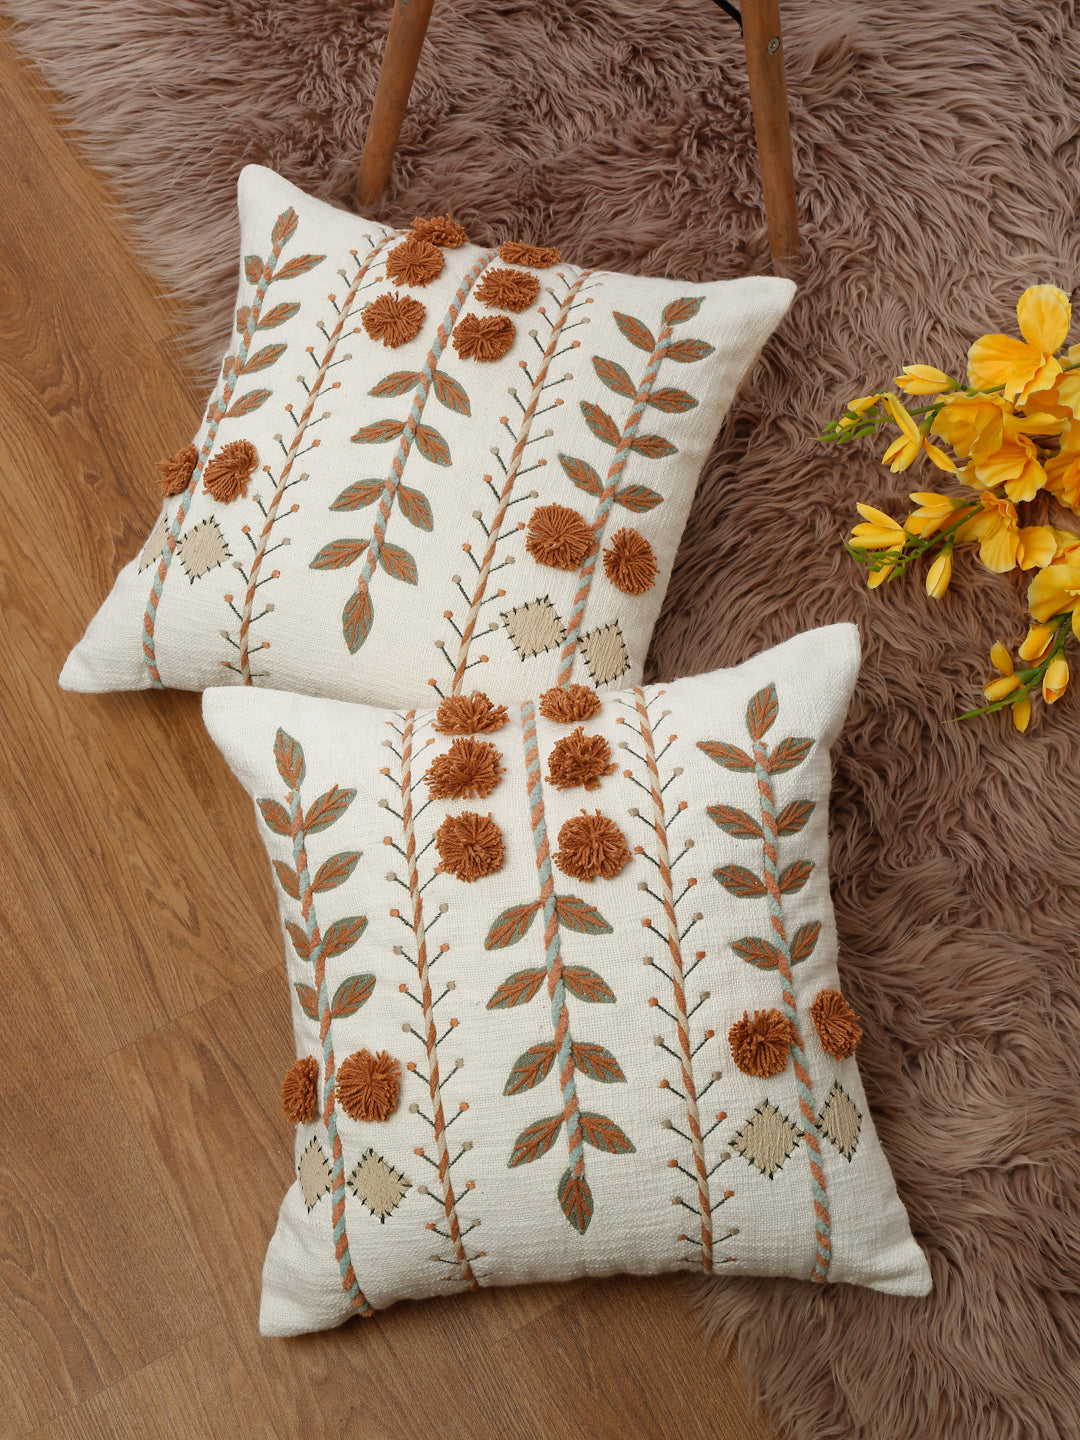 Set of 2 Floral Pillow Covers for a Vibrant Home Decor